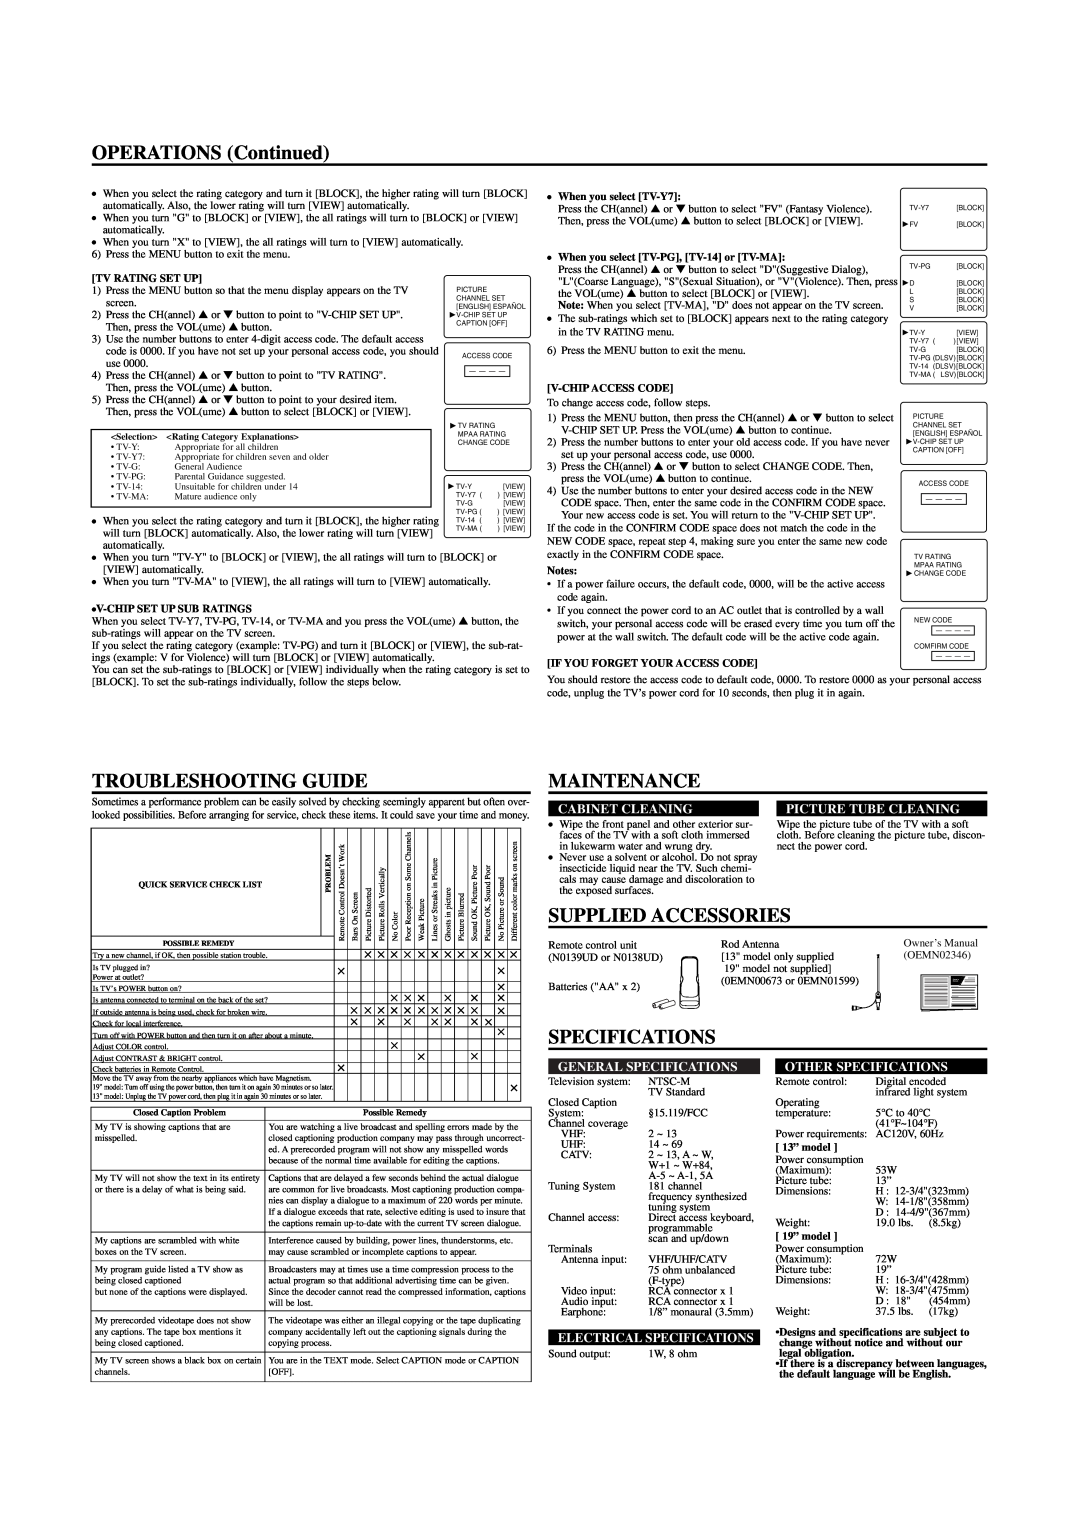 Sylvania SRT2313A, SRT2319A OPERATIONS Continued, Troubleshooting Guide, Maintenance, Supplied Accessories, Specifications 